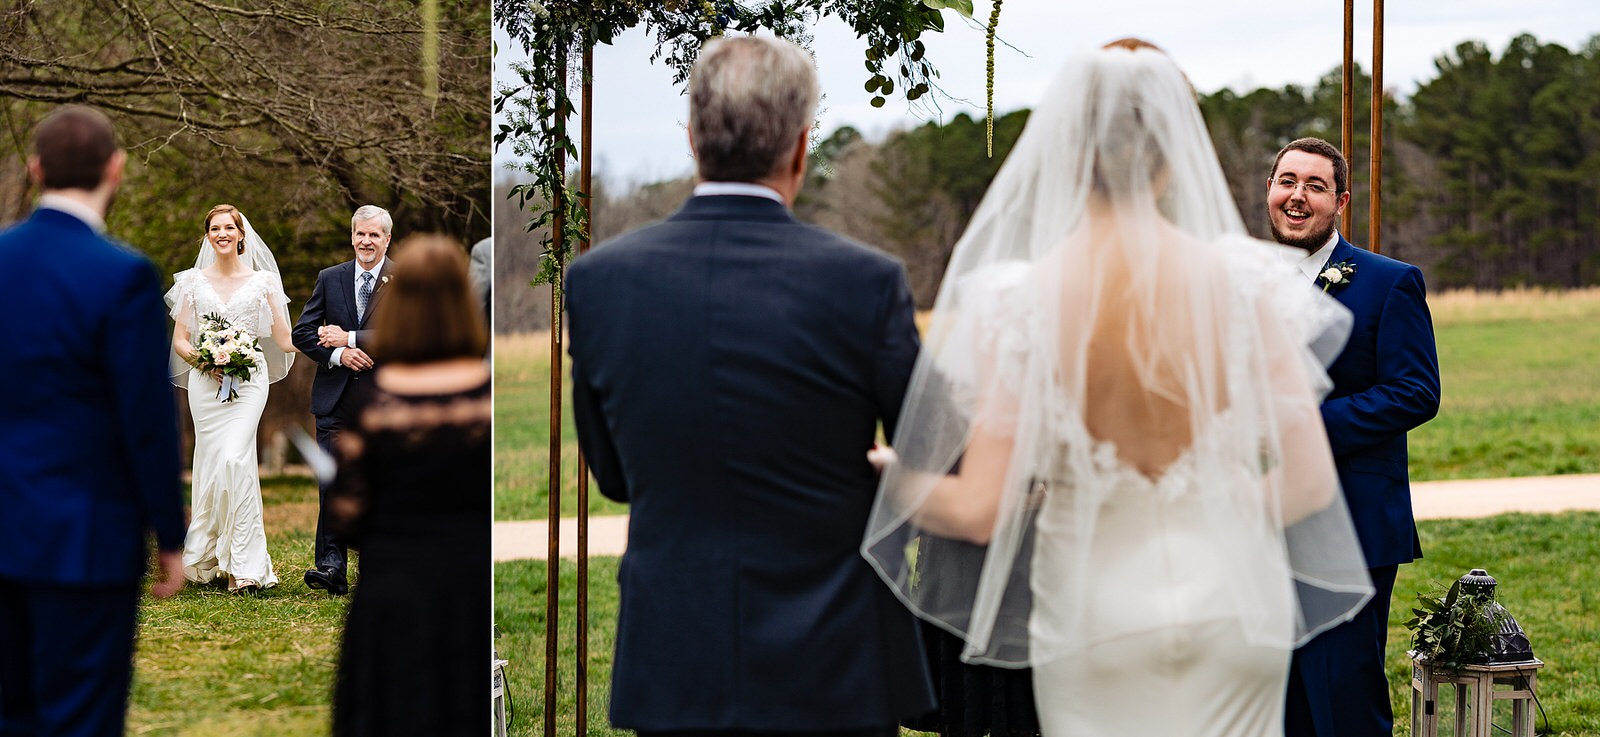 Bride and her father walk down the aisle at an outdoor wedding ceremony at The Meadows Raleigh